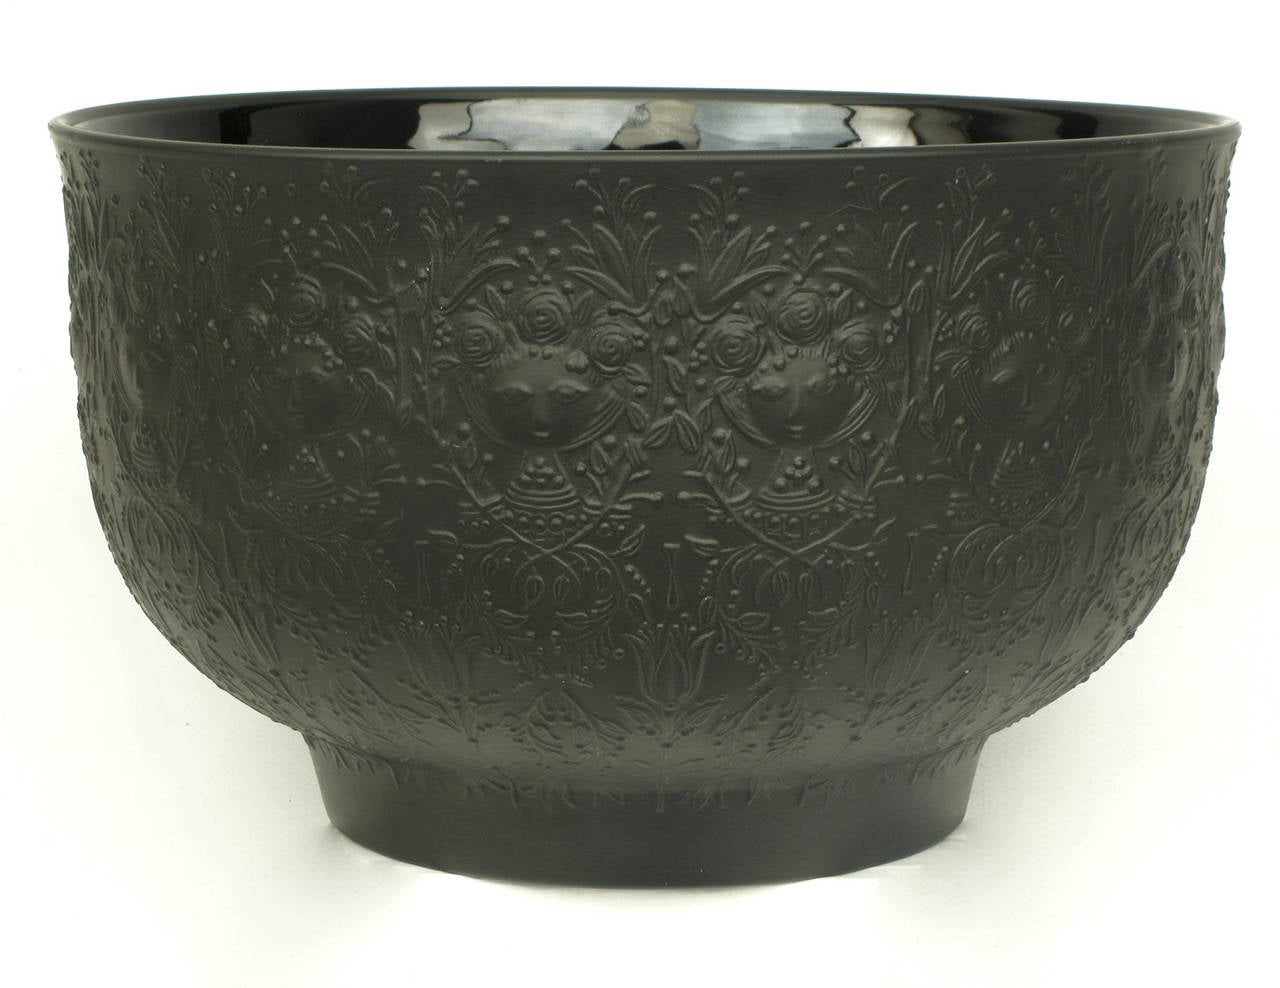 Black porcelain serving bowl by Bjorn Wiinblad for Rosenthal's Studio Linie. Encompassed by Wiinblad's whimsical female character and psychedelic Victorian vines and flowers.